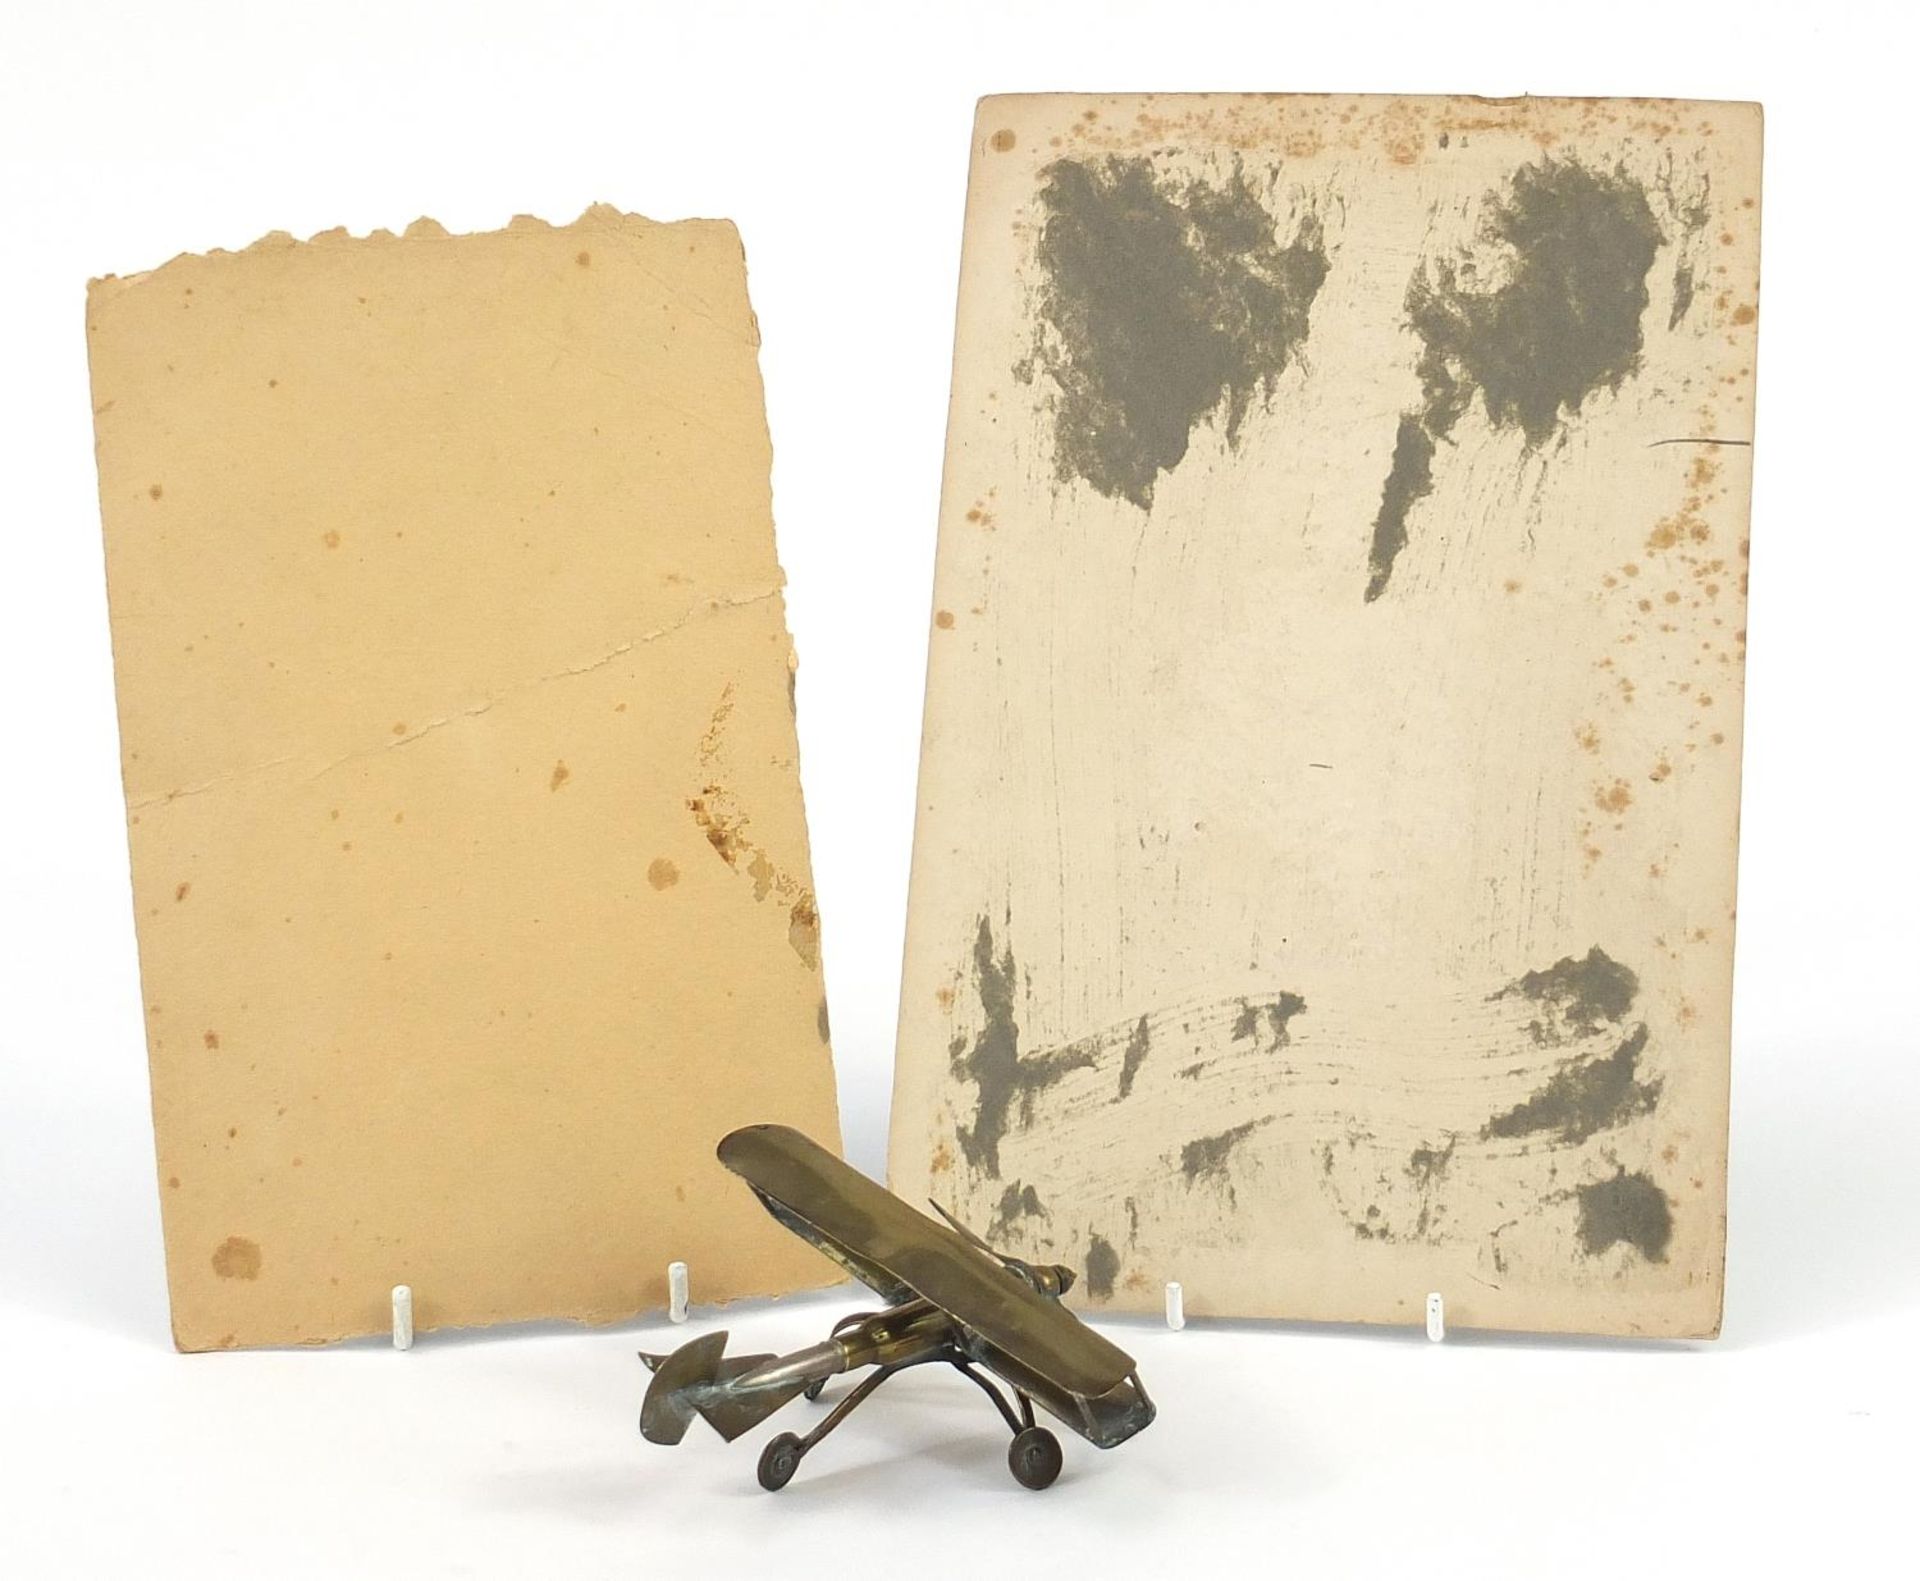 British military World War I trench art plane and two photographs including one of a soldier with - Image 3 of 3